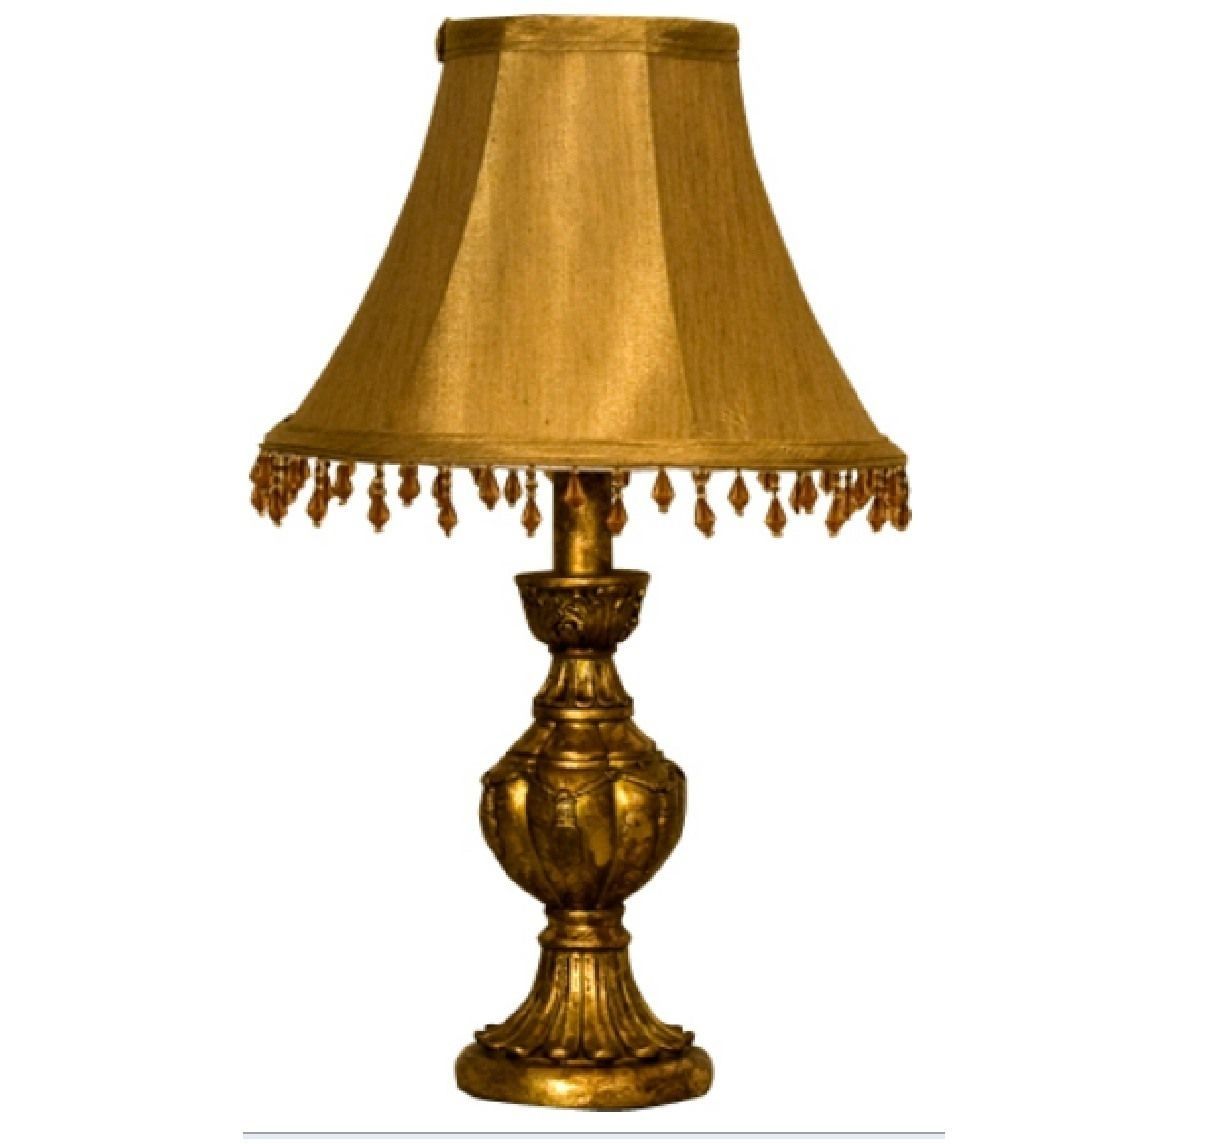 Lamps | Table Lamps For Living Room Traditional Style Table Lamps To In Table Lamps For Traditional Living Room (View 4 of 15)